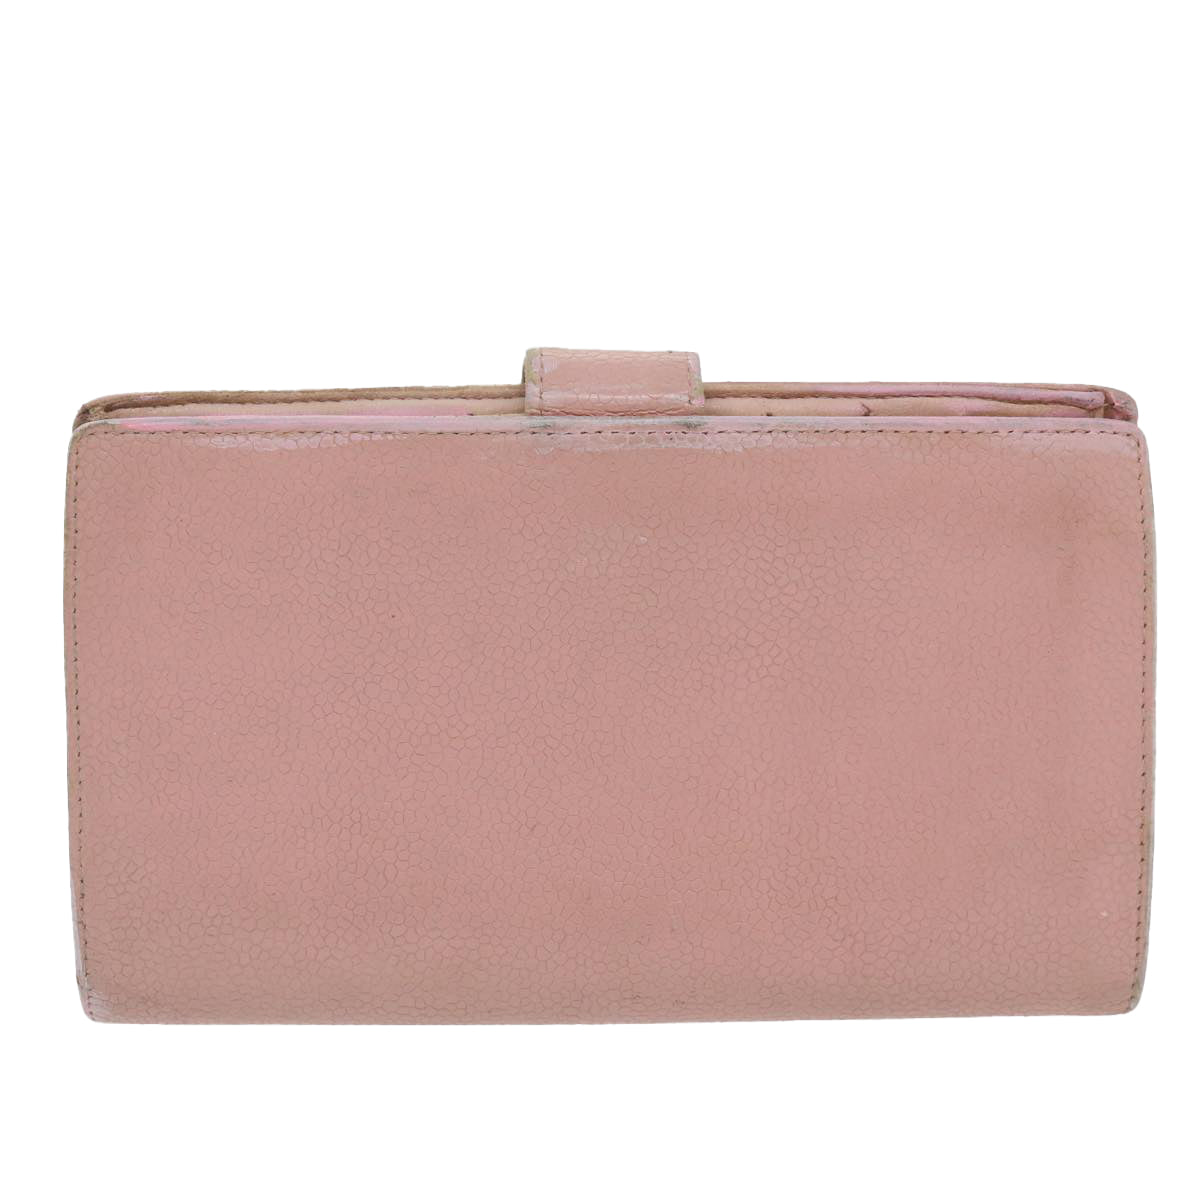 CHANEL Long Wallet Caviar Skin Pink CC Auth bs11186